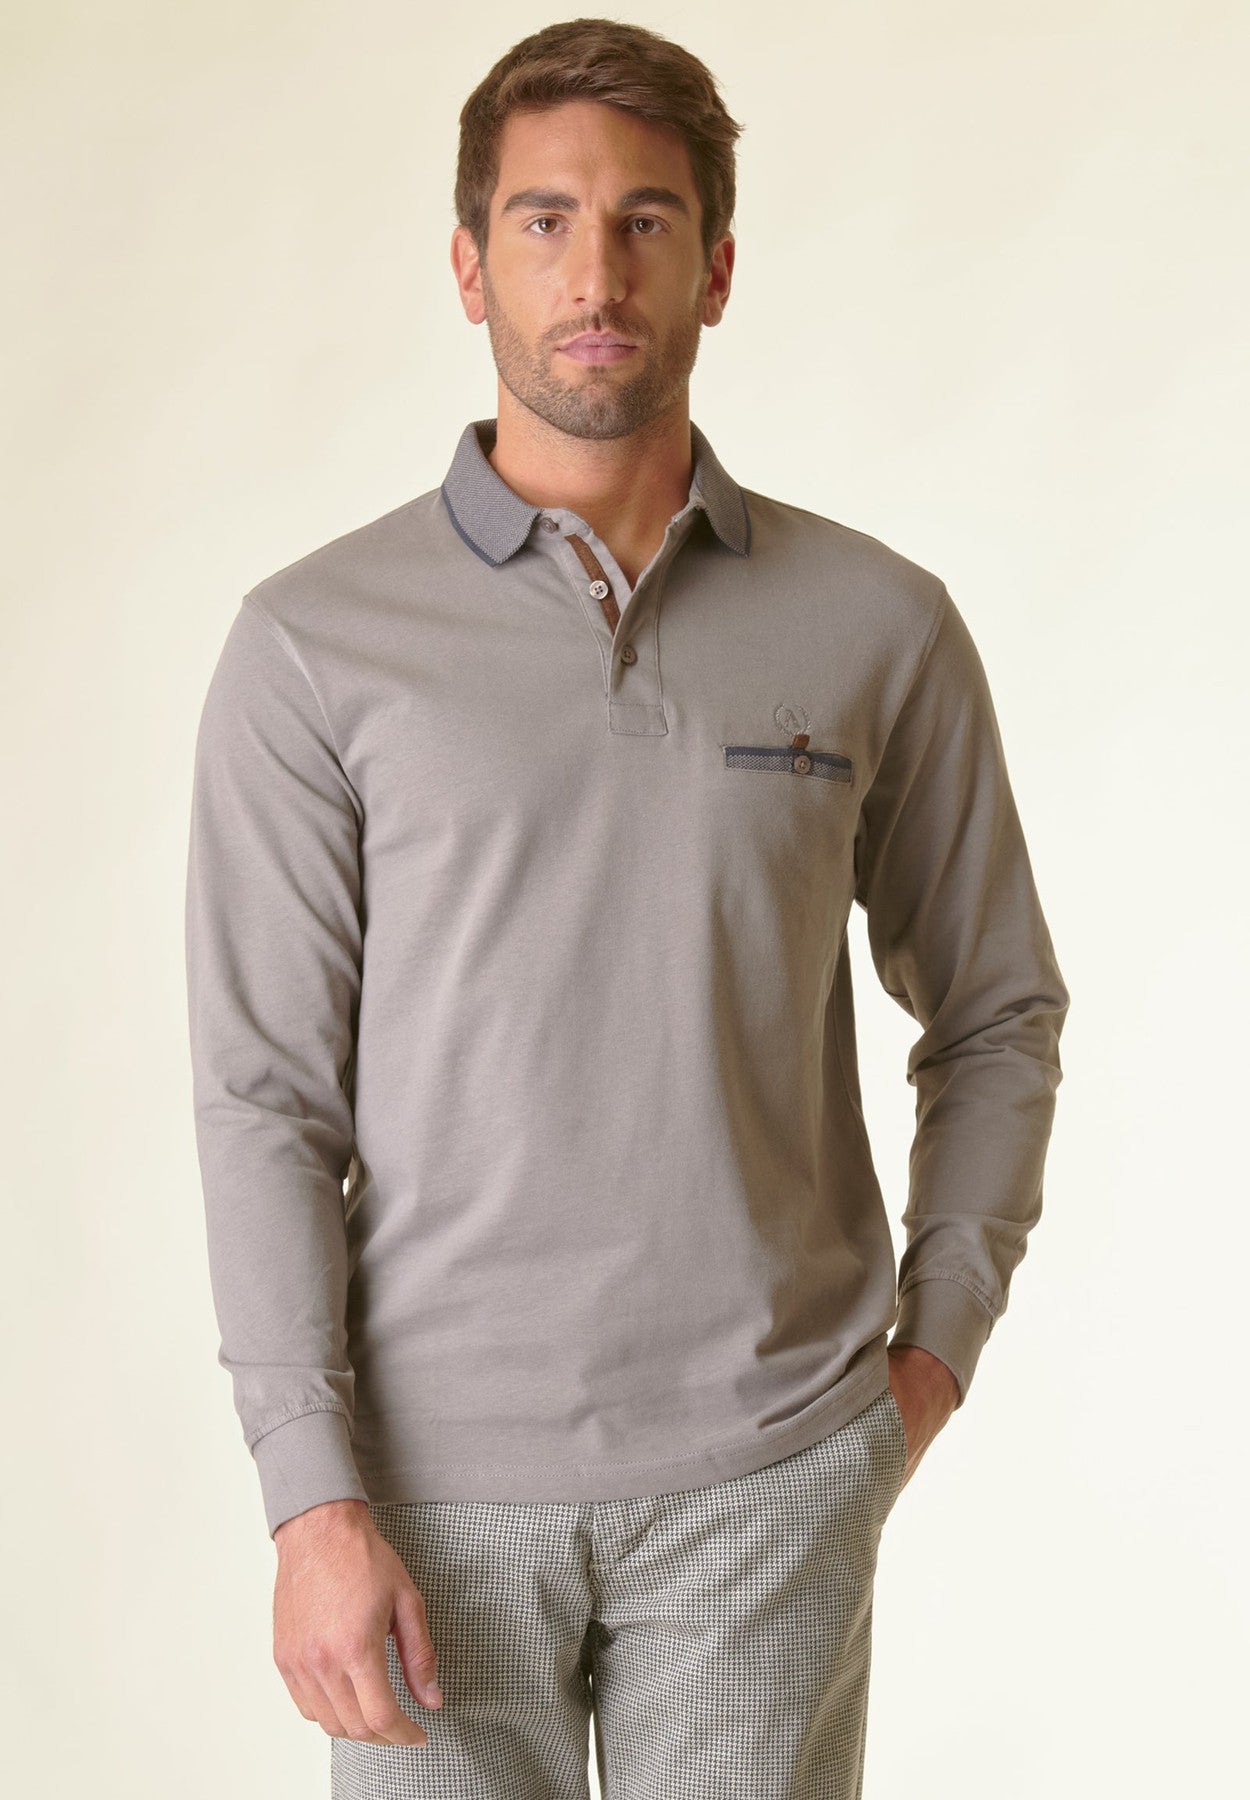 Grey Faded polo matching embroidery inserted pocket